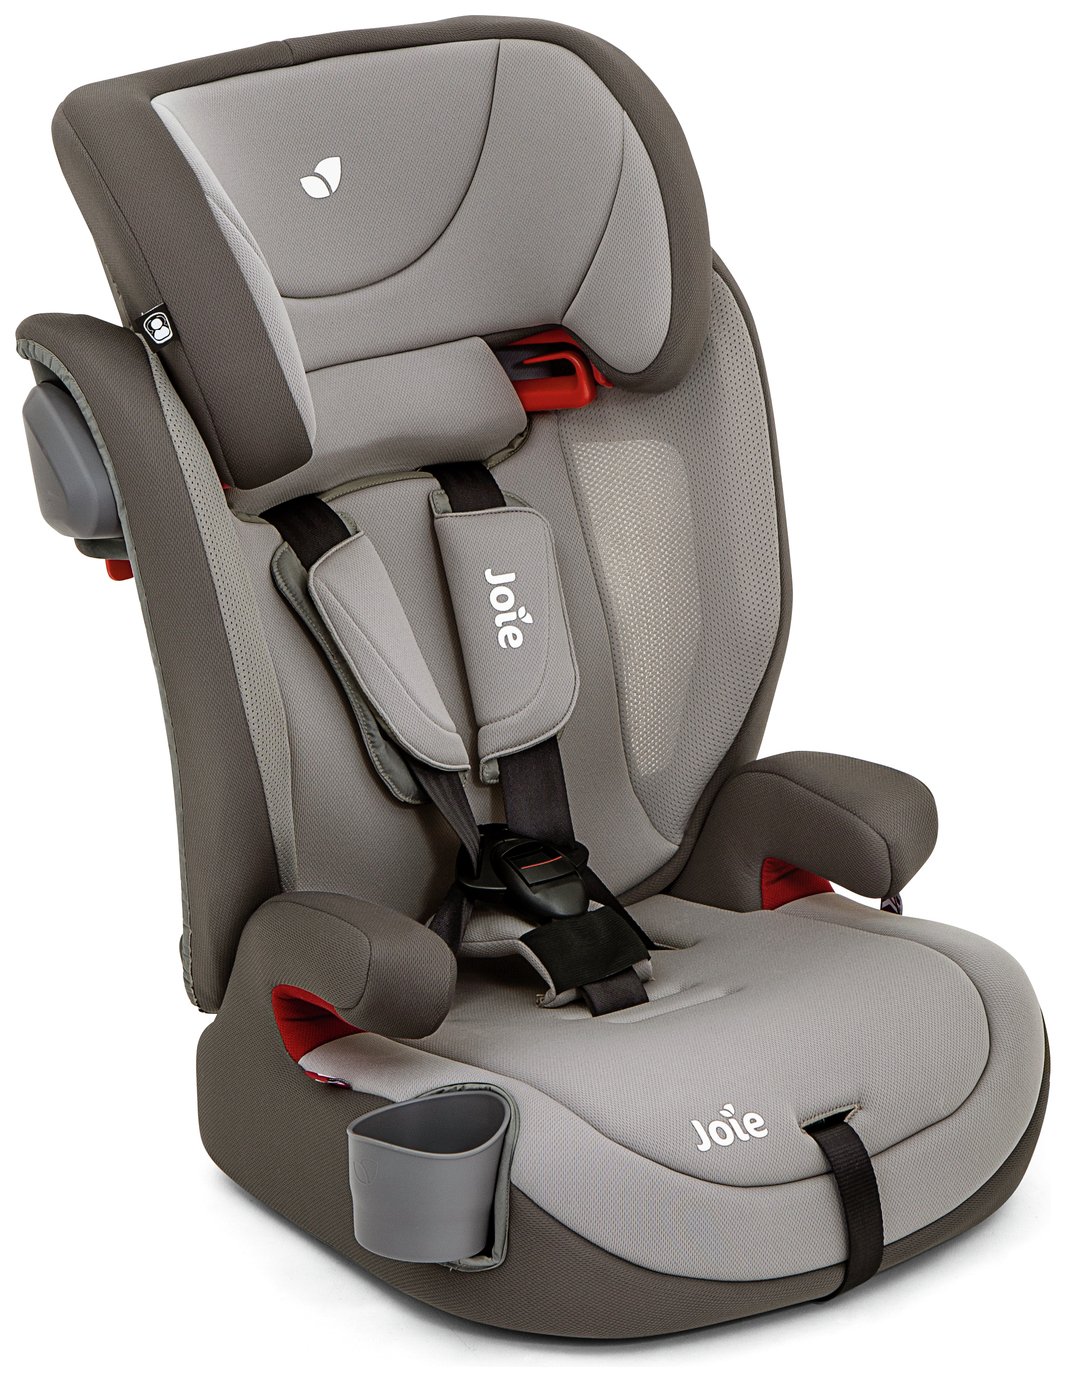 Joie Elevate Group 1/2/3 Car Seat - Grey